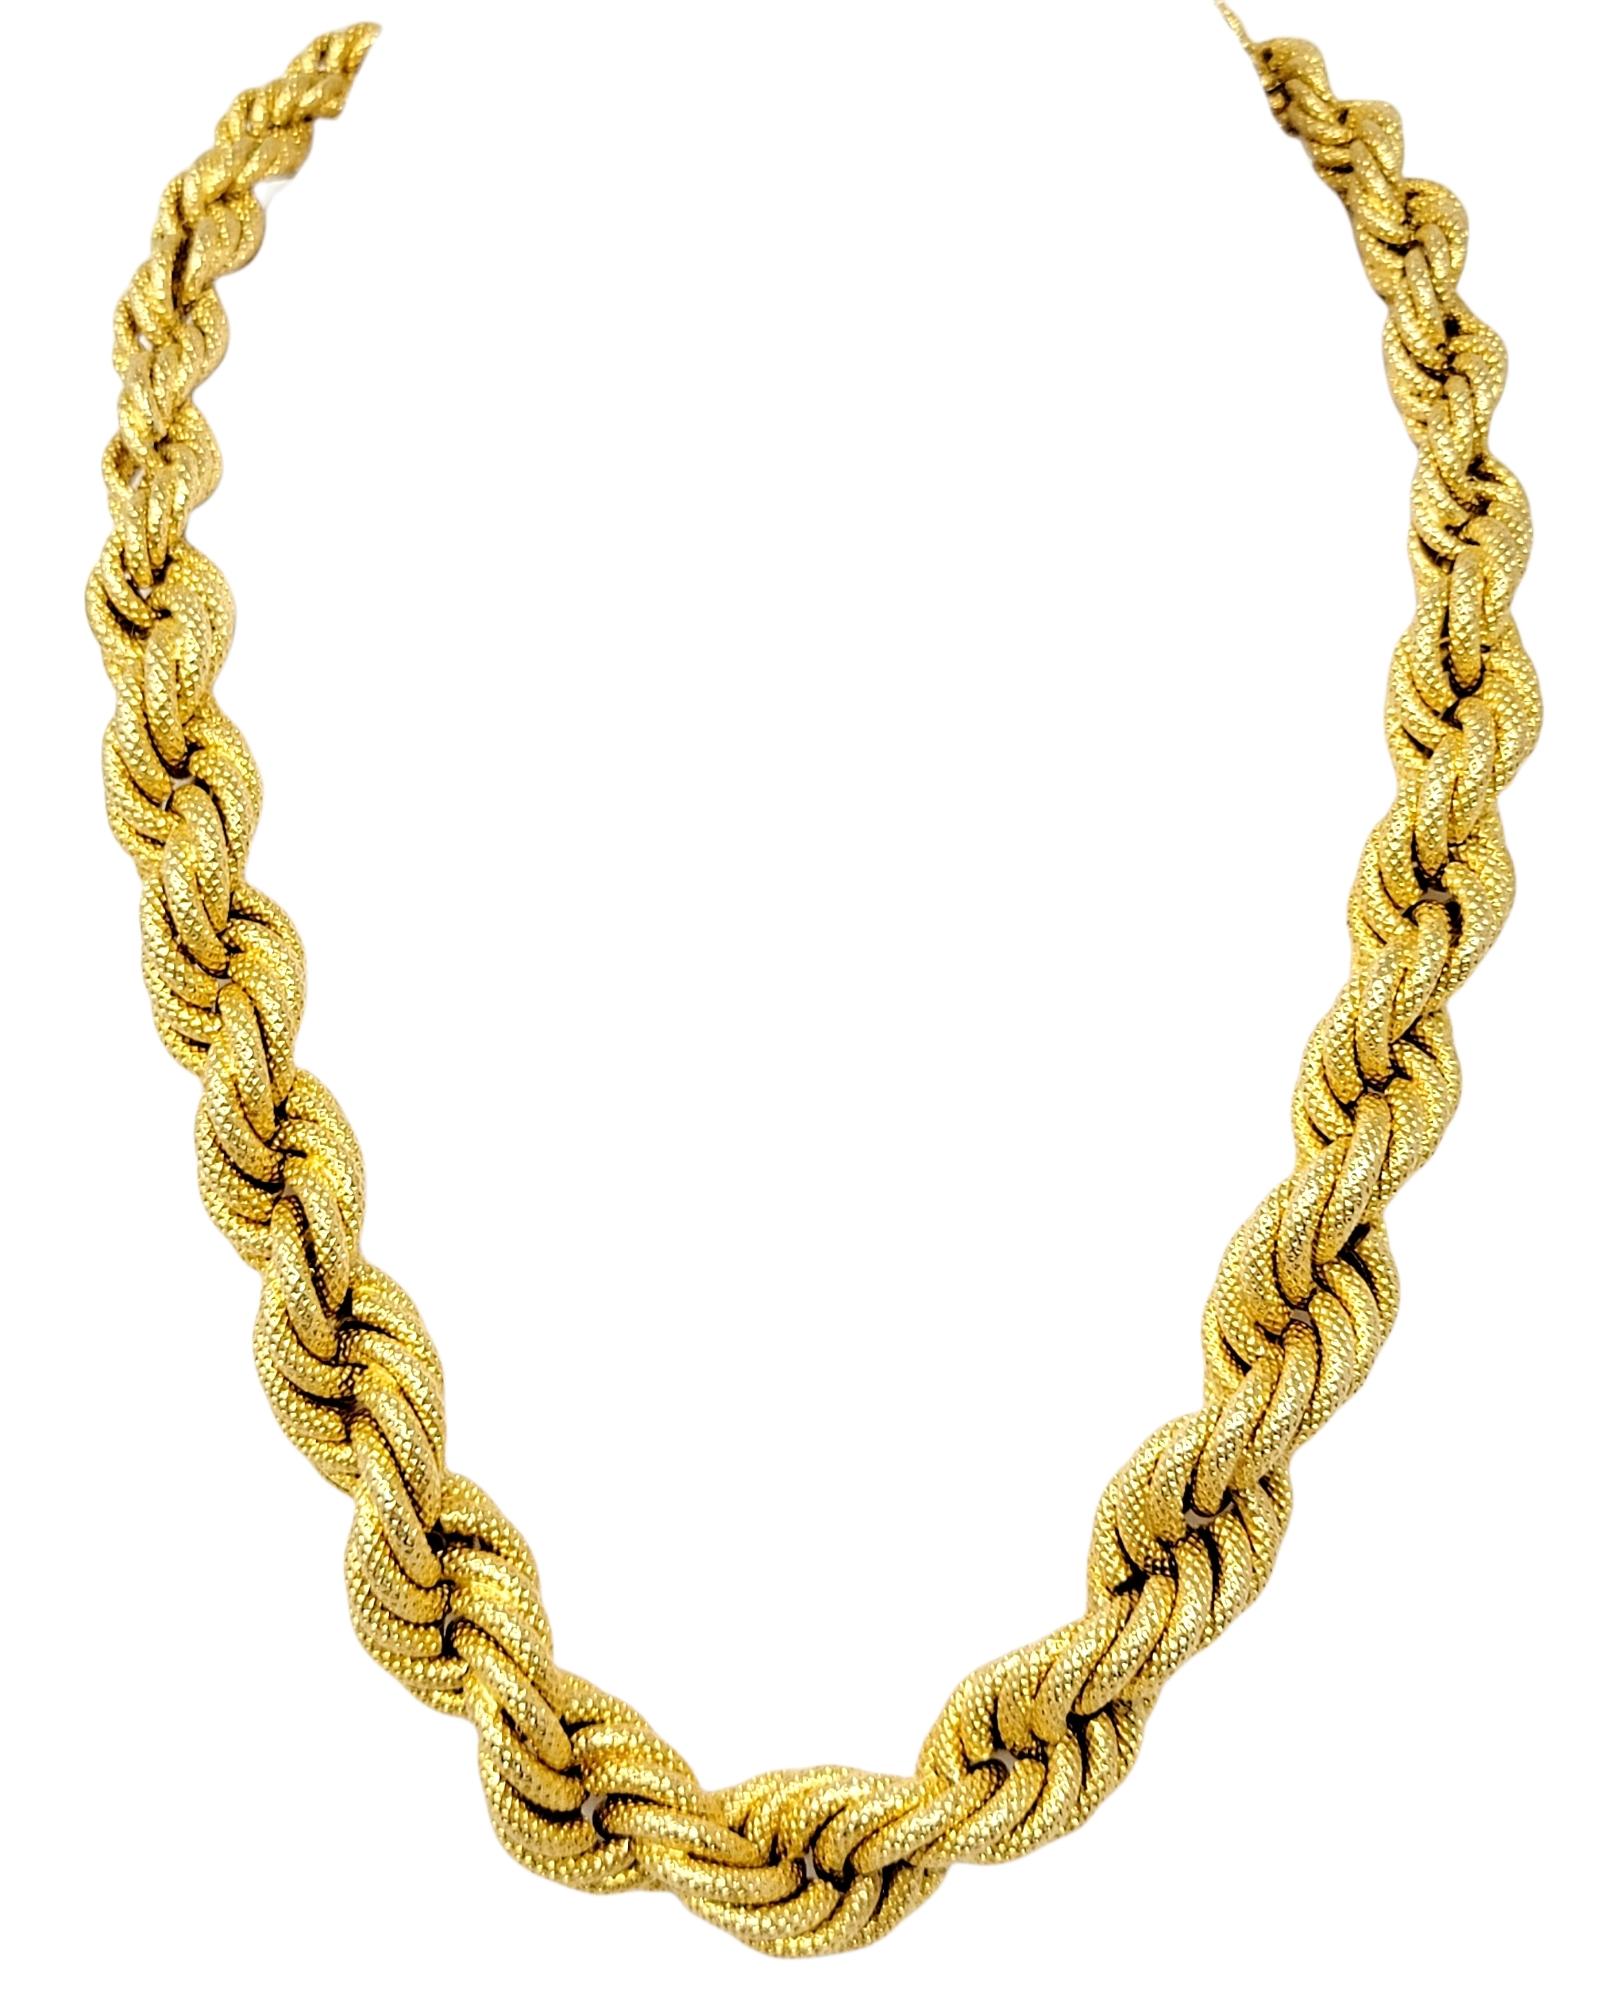 5 pennyweight gold chain